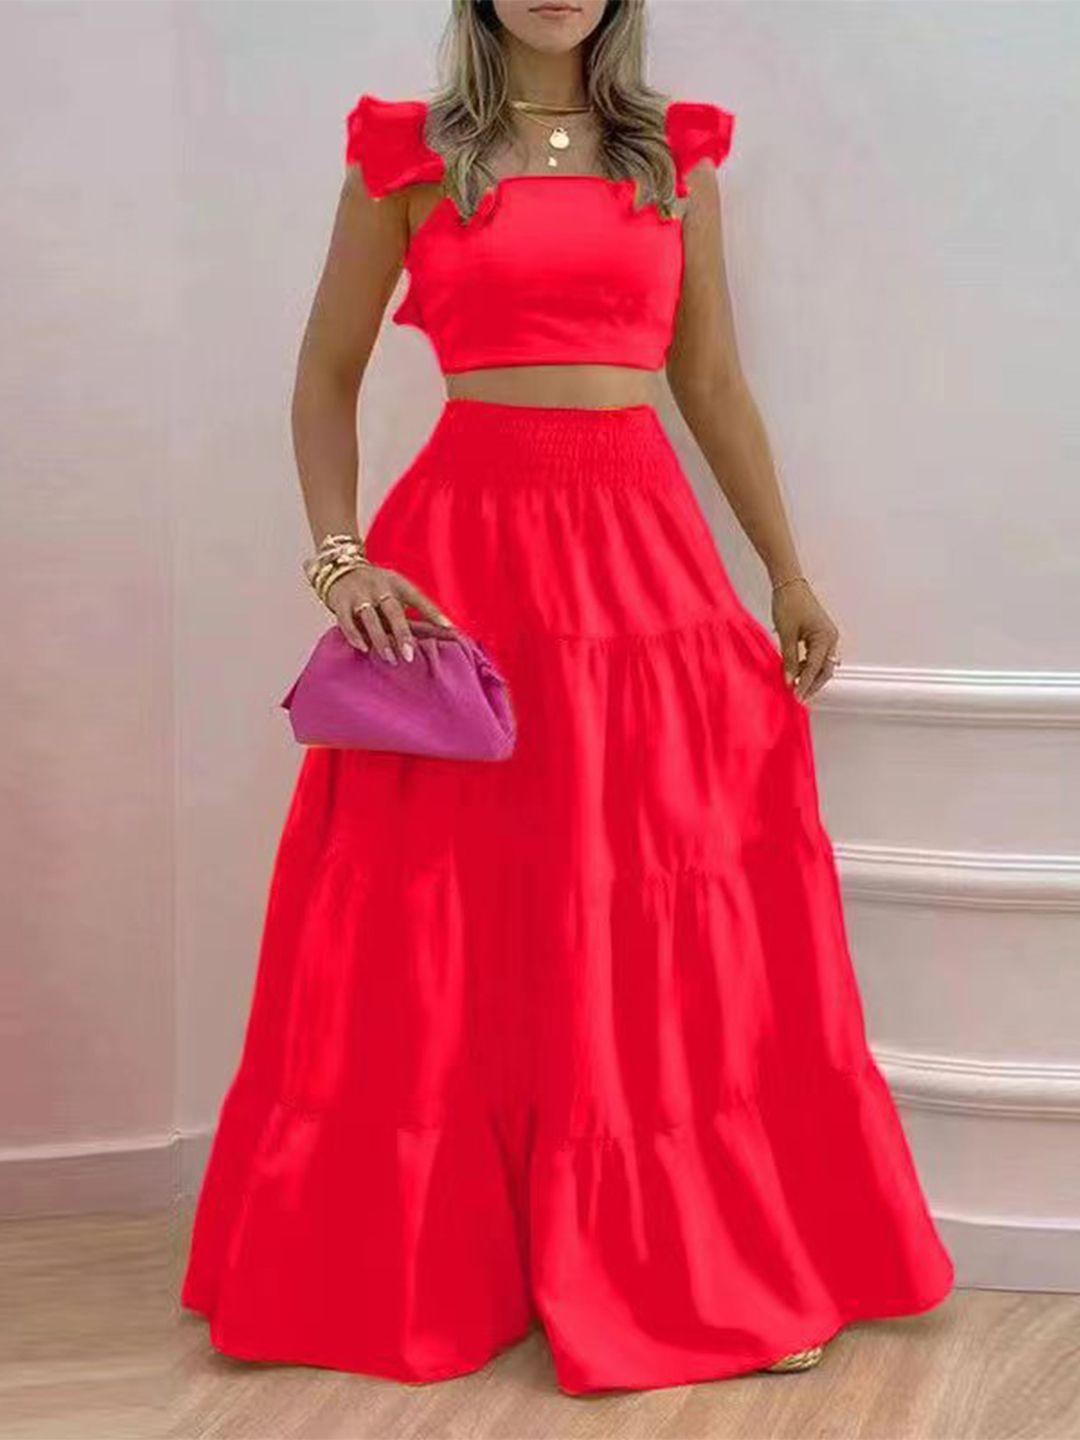 stylecast red square neck top with skirt